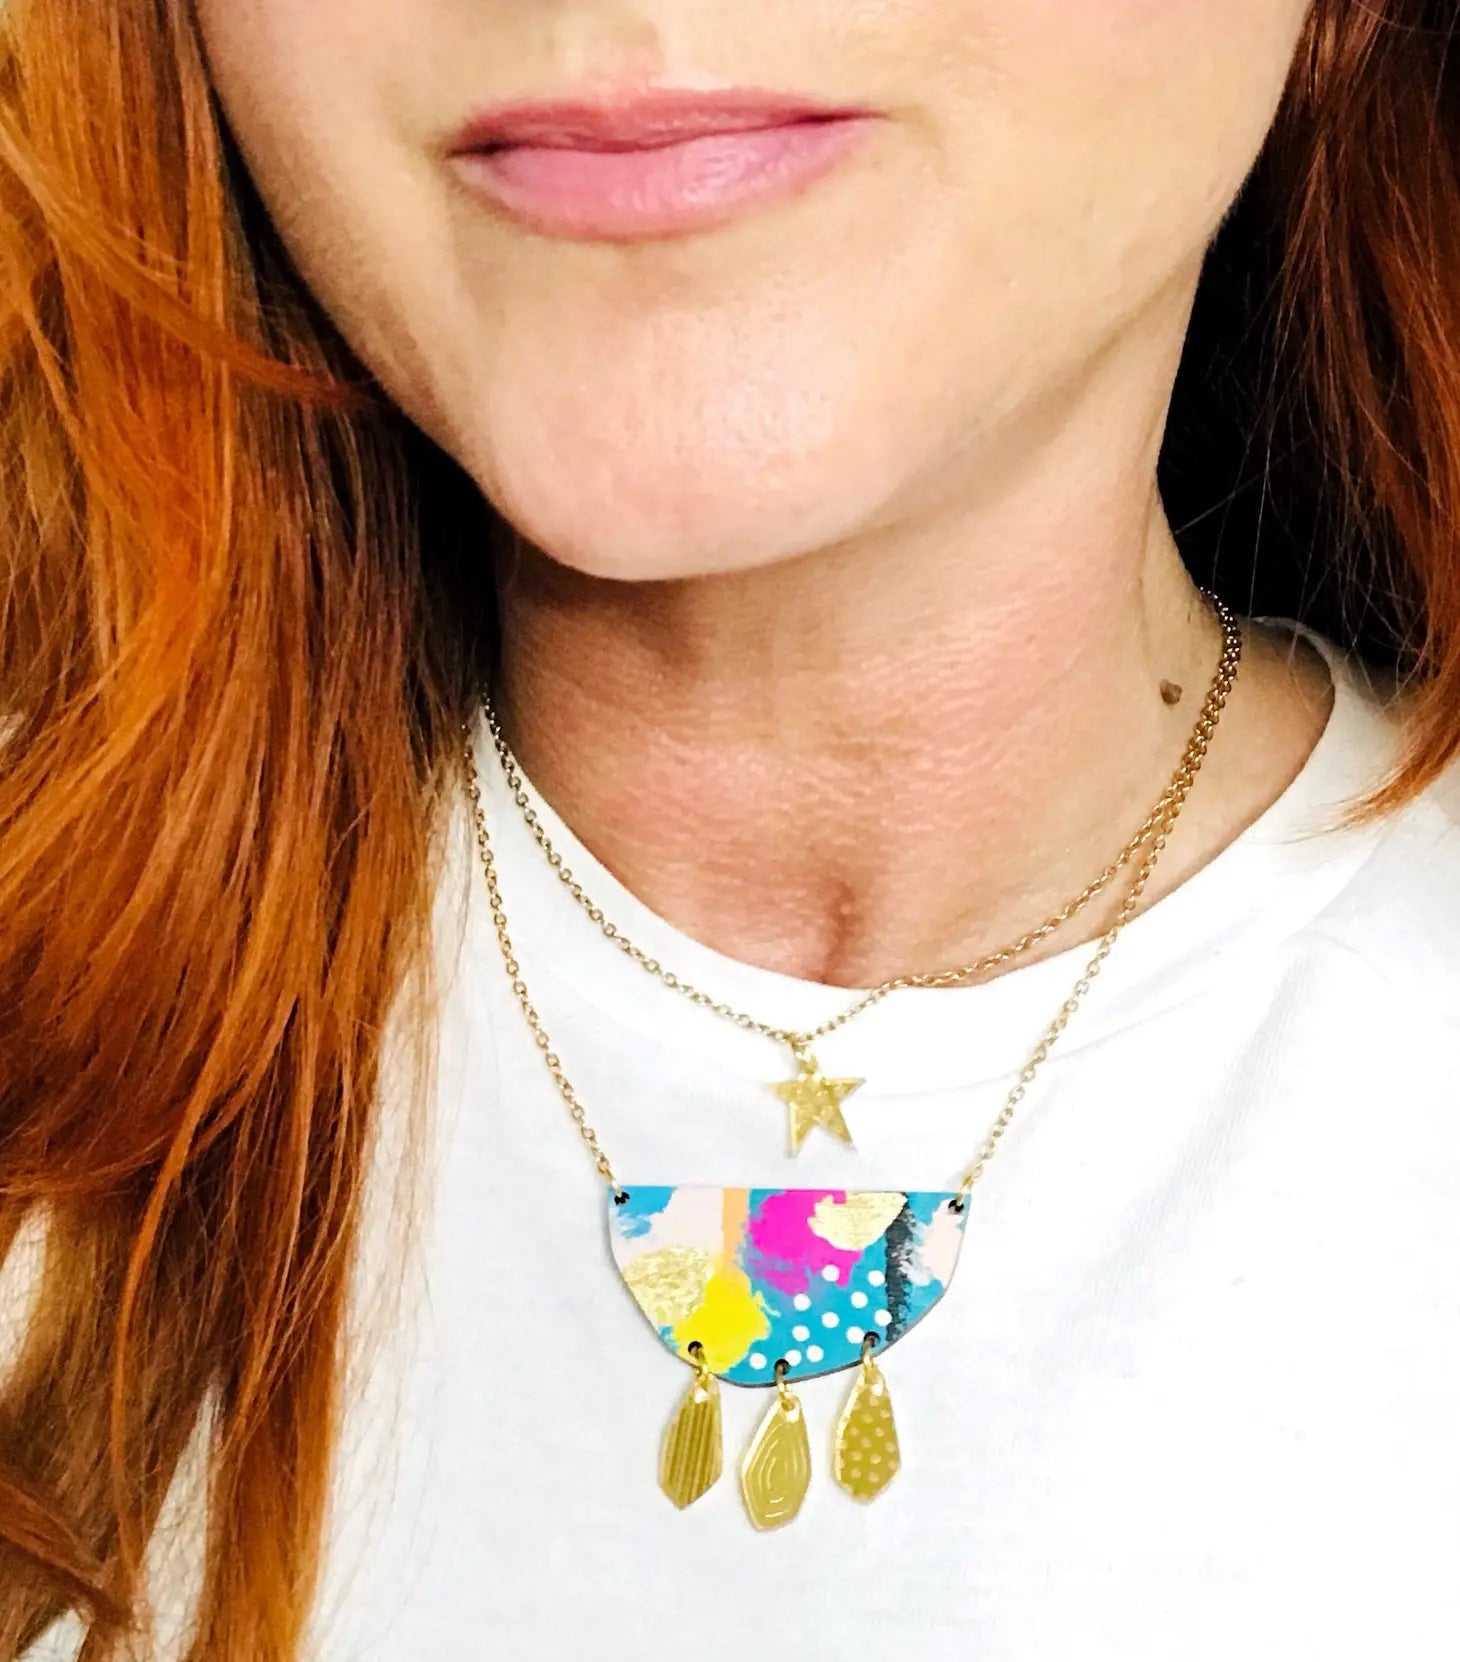 Colourful Abstract Wooden Pendant Necklace - The Little Jewellery Company